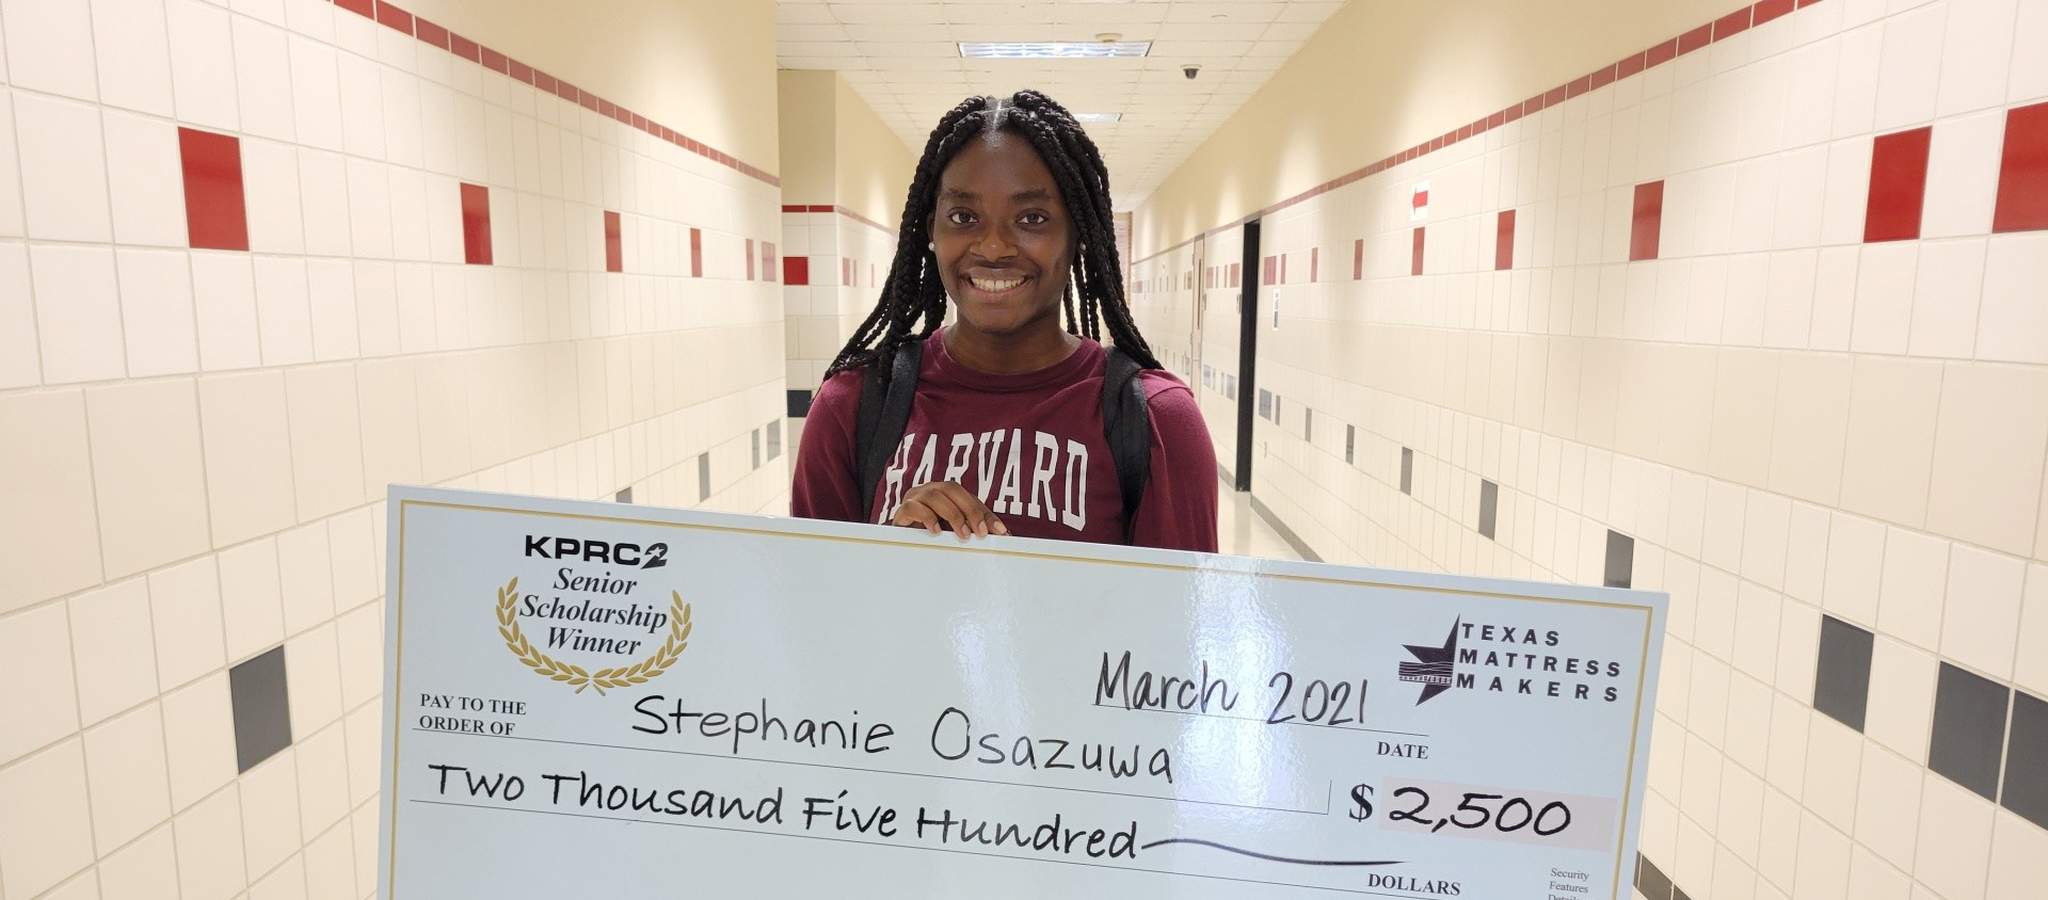 KPRC 2 Senior Scholarship: Meet Stephanie Osazuwa, the senior who is advocating for low-socioeconomic communities, working to help others succeed